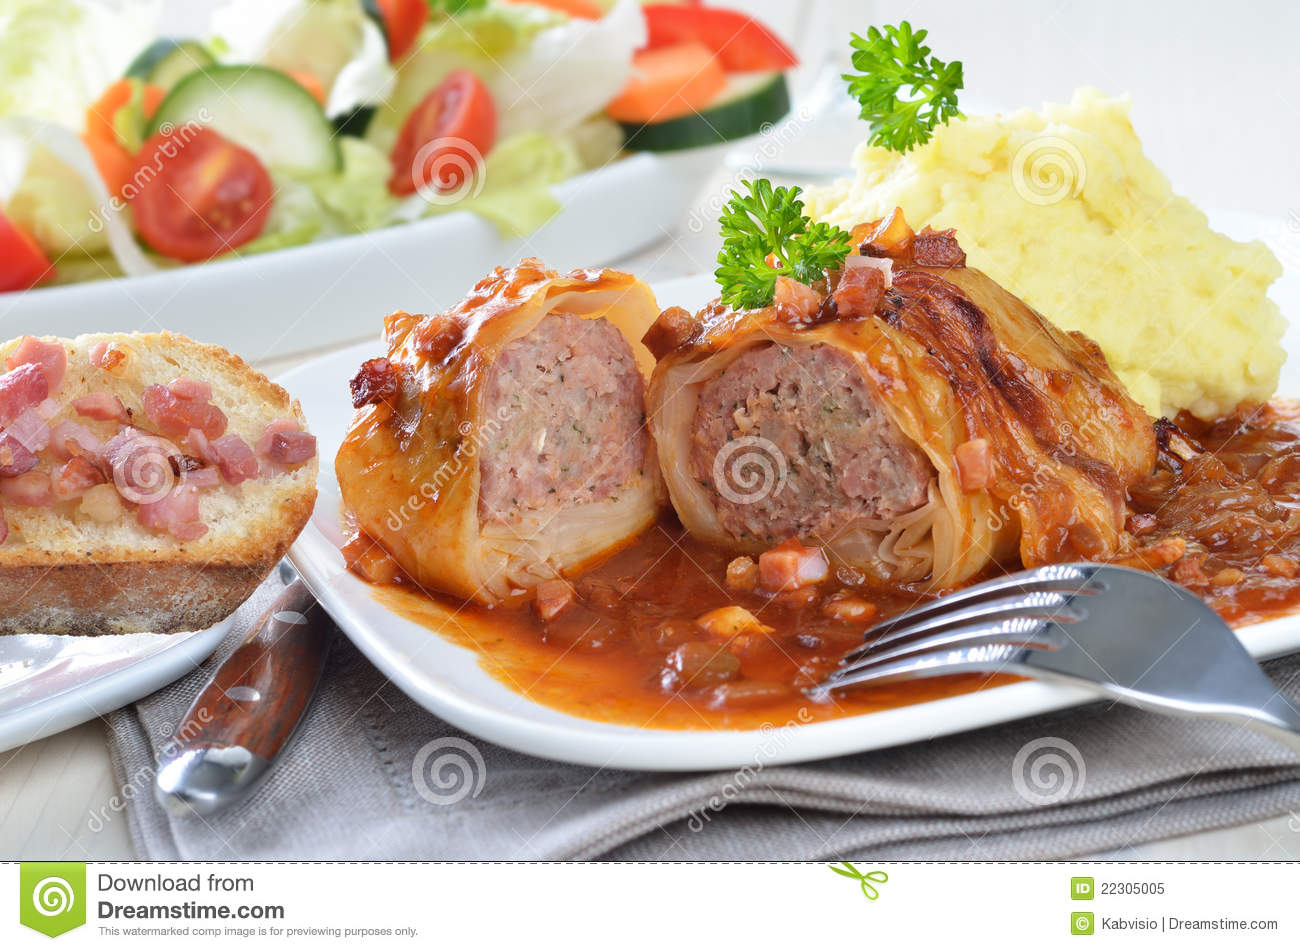 Cabbage Rolls Royalty Free Stock Photo   Image  22305005